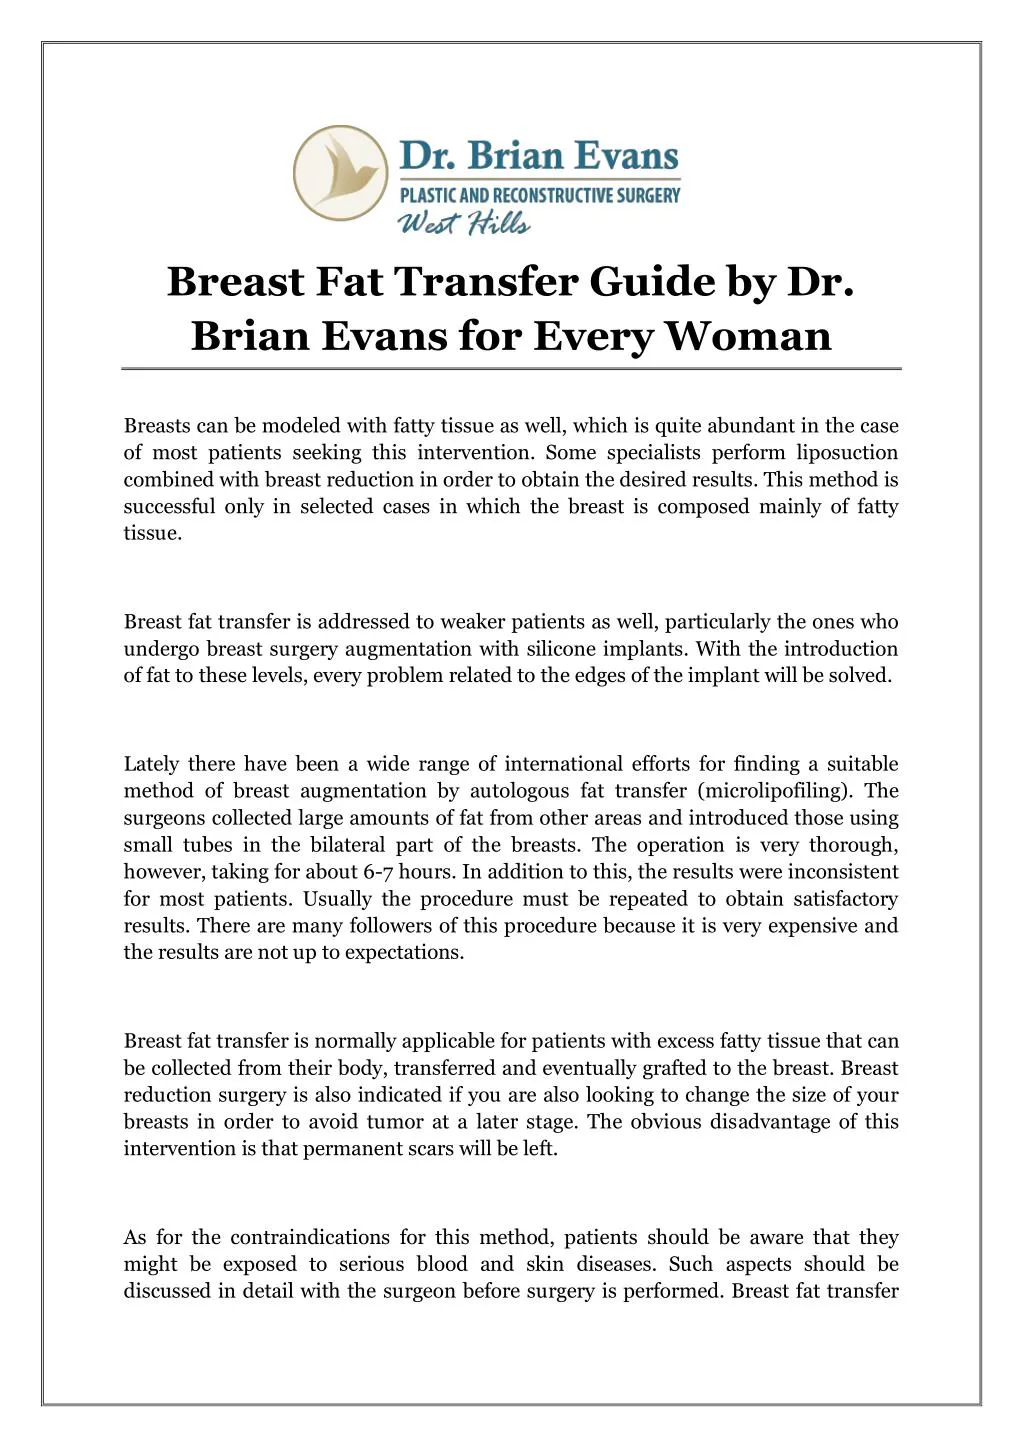 breast fat transfer guide by dr brian evans